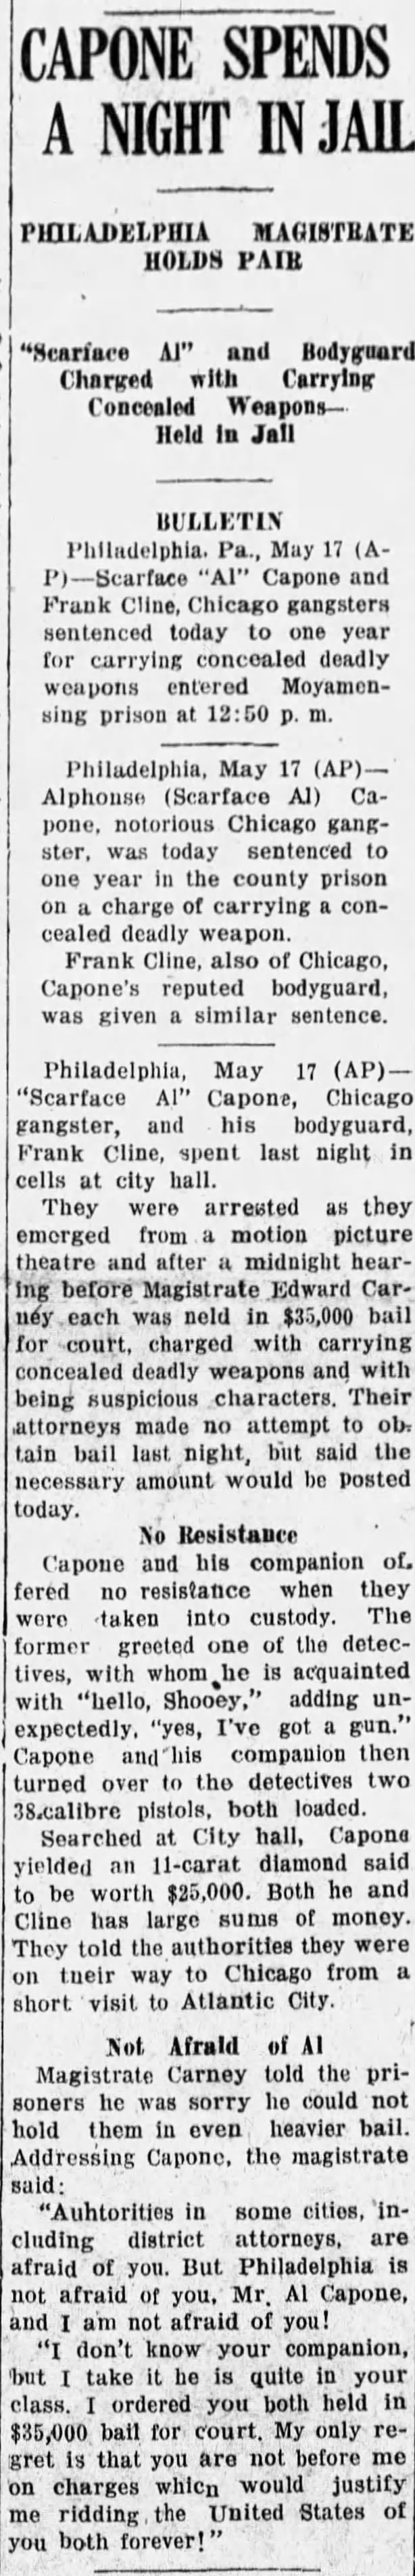 Al Capone charged with carrying a concealed weapon; is given year-long jail sentence, 1929